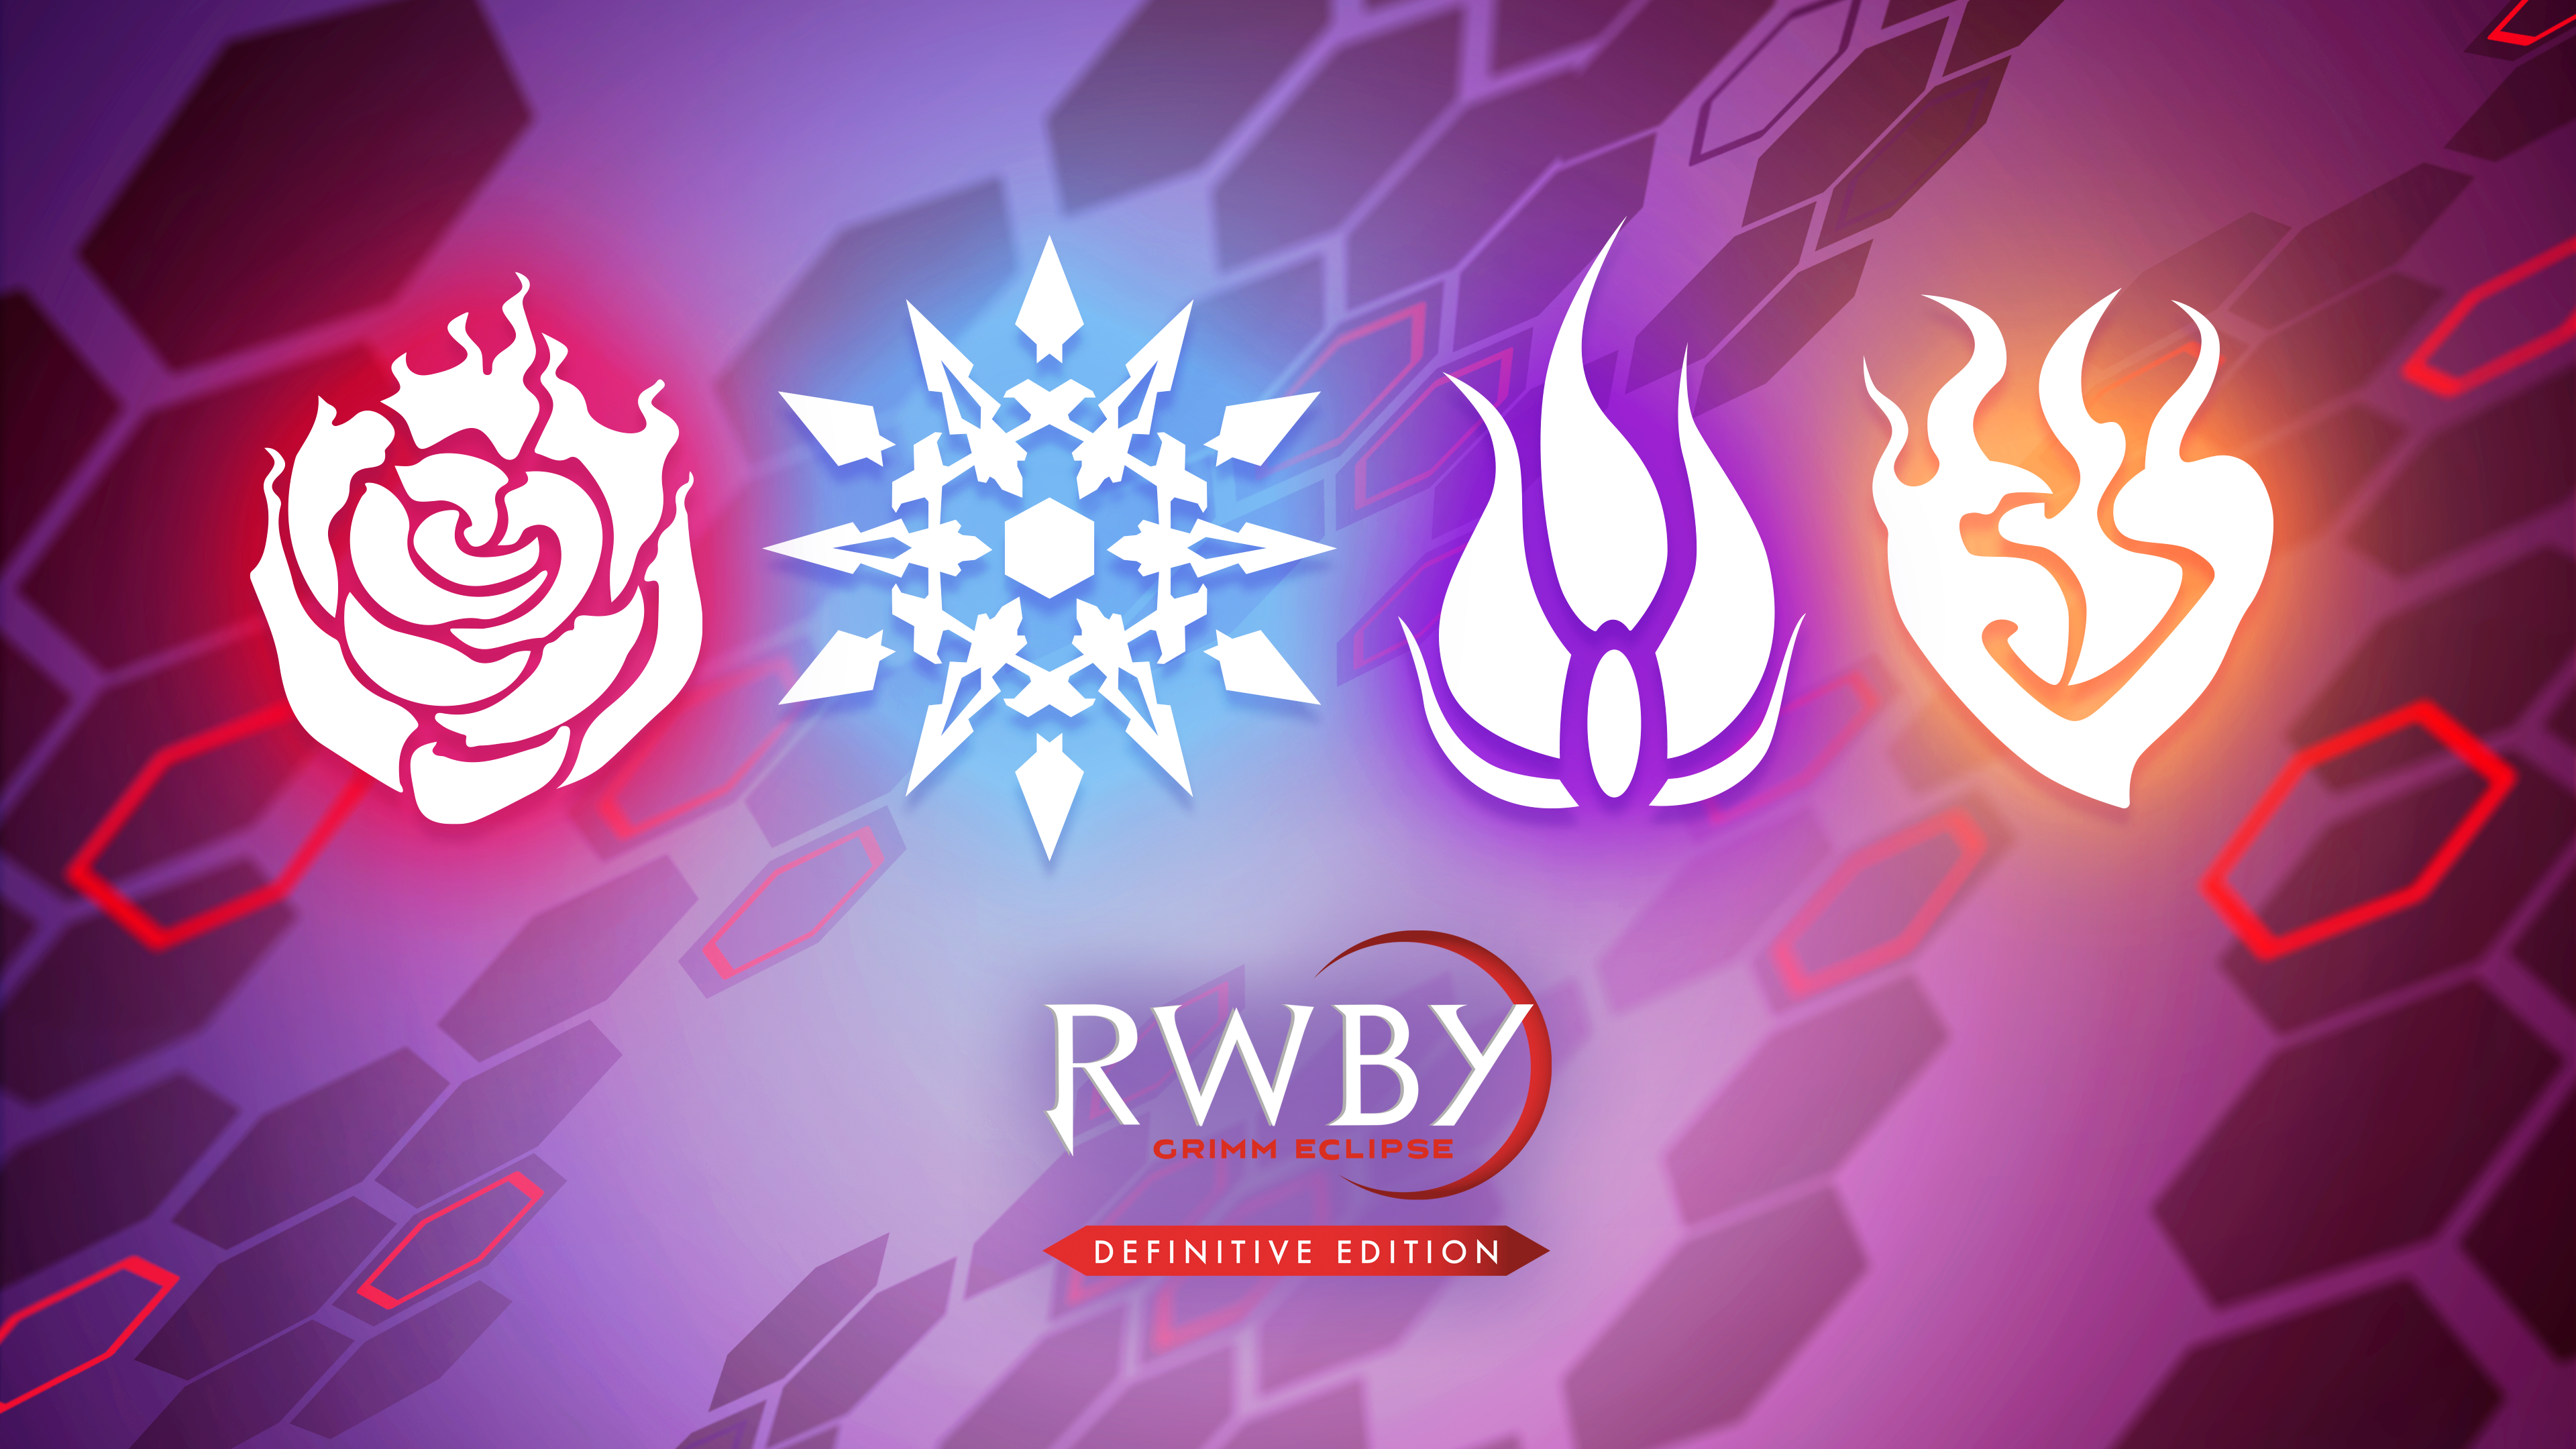 3840x2160 RWBY HD Wallpapers and Backgrounds